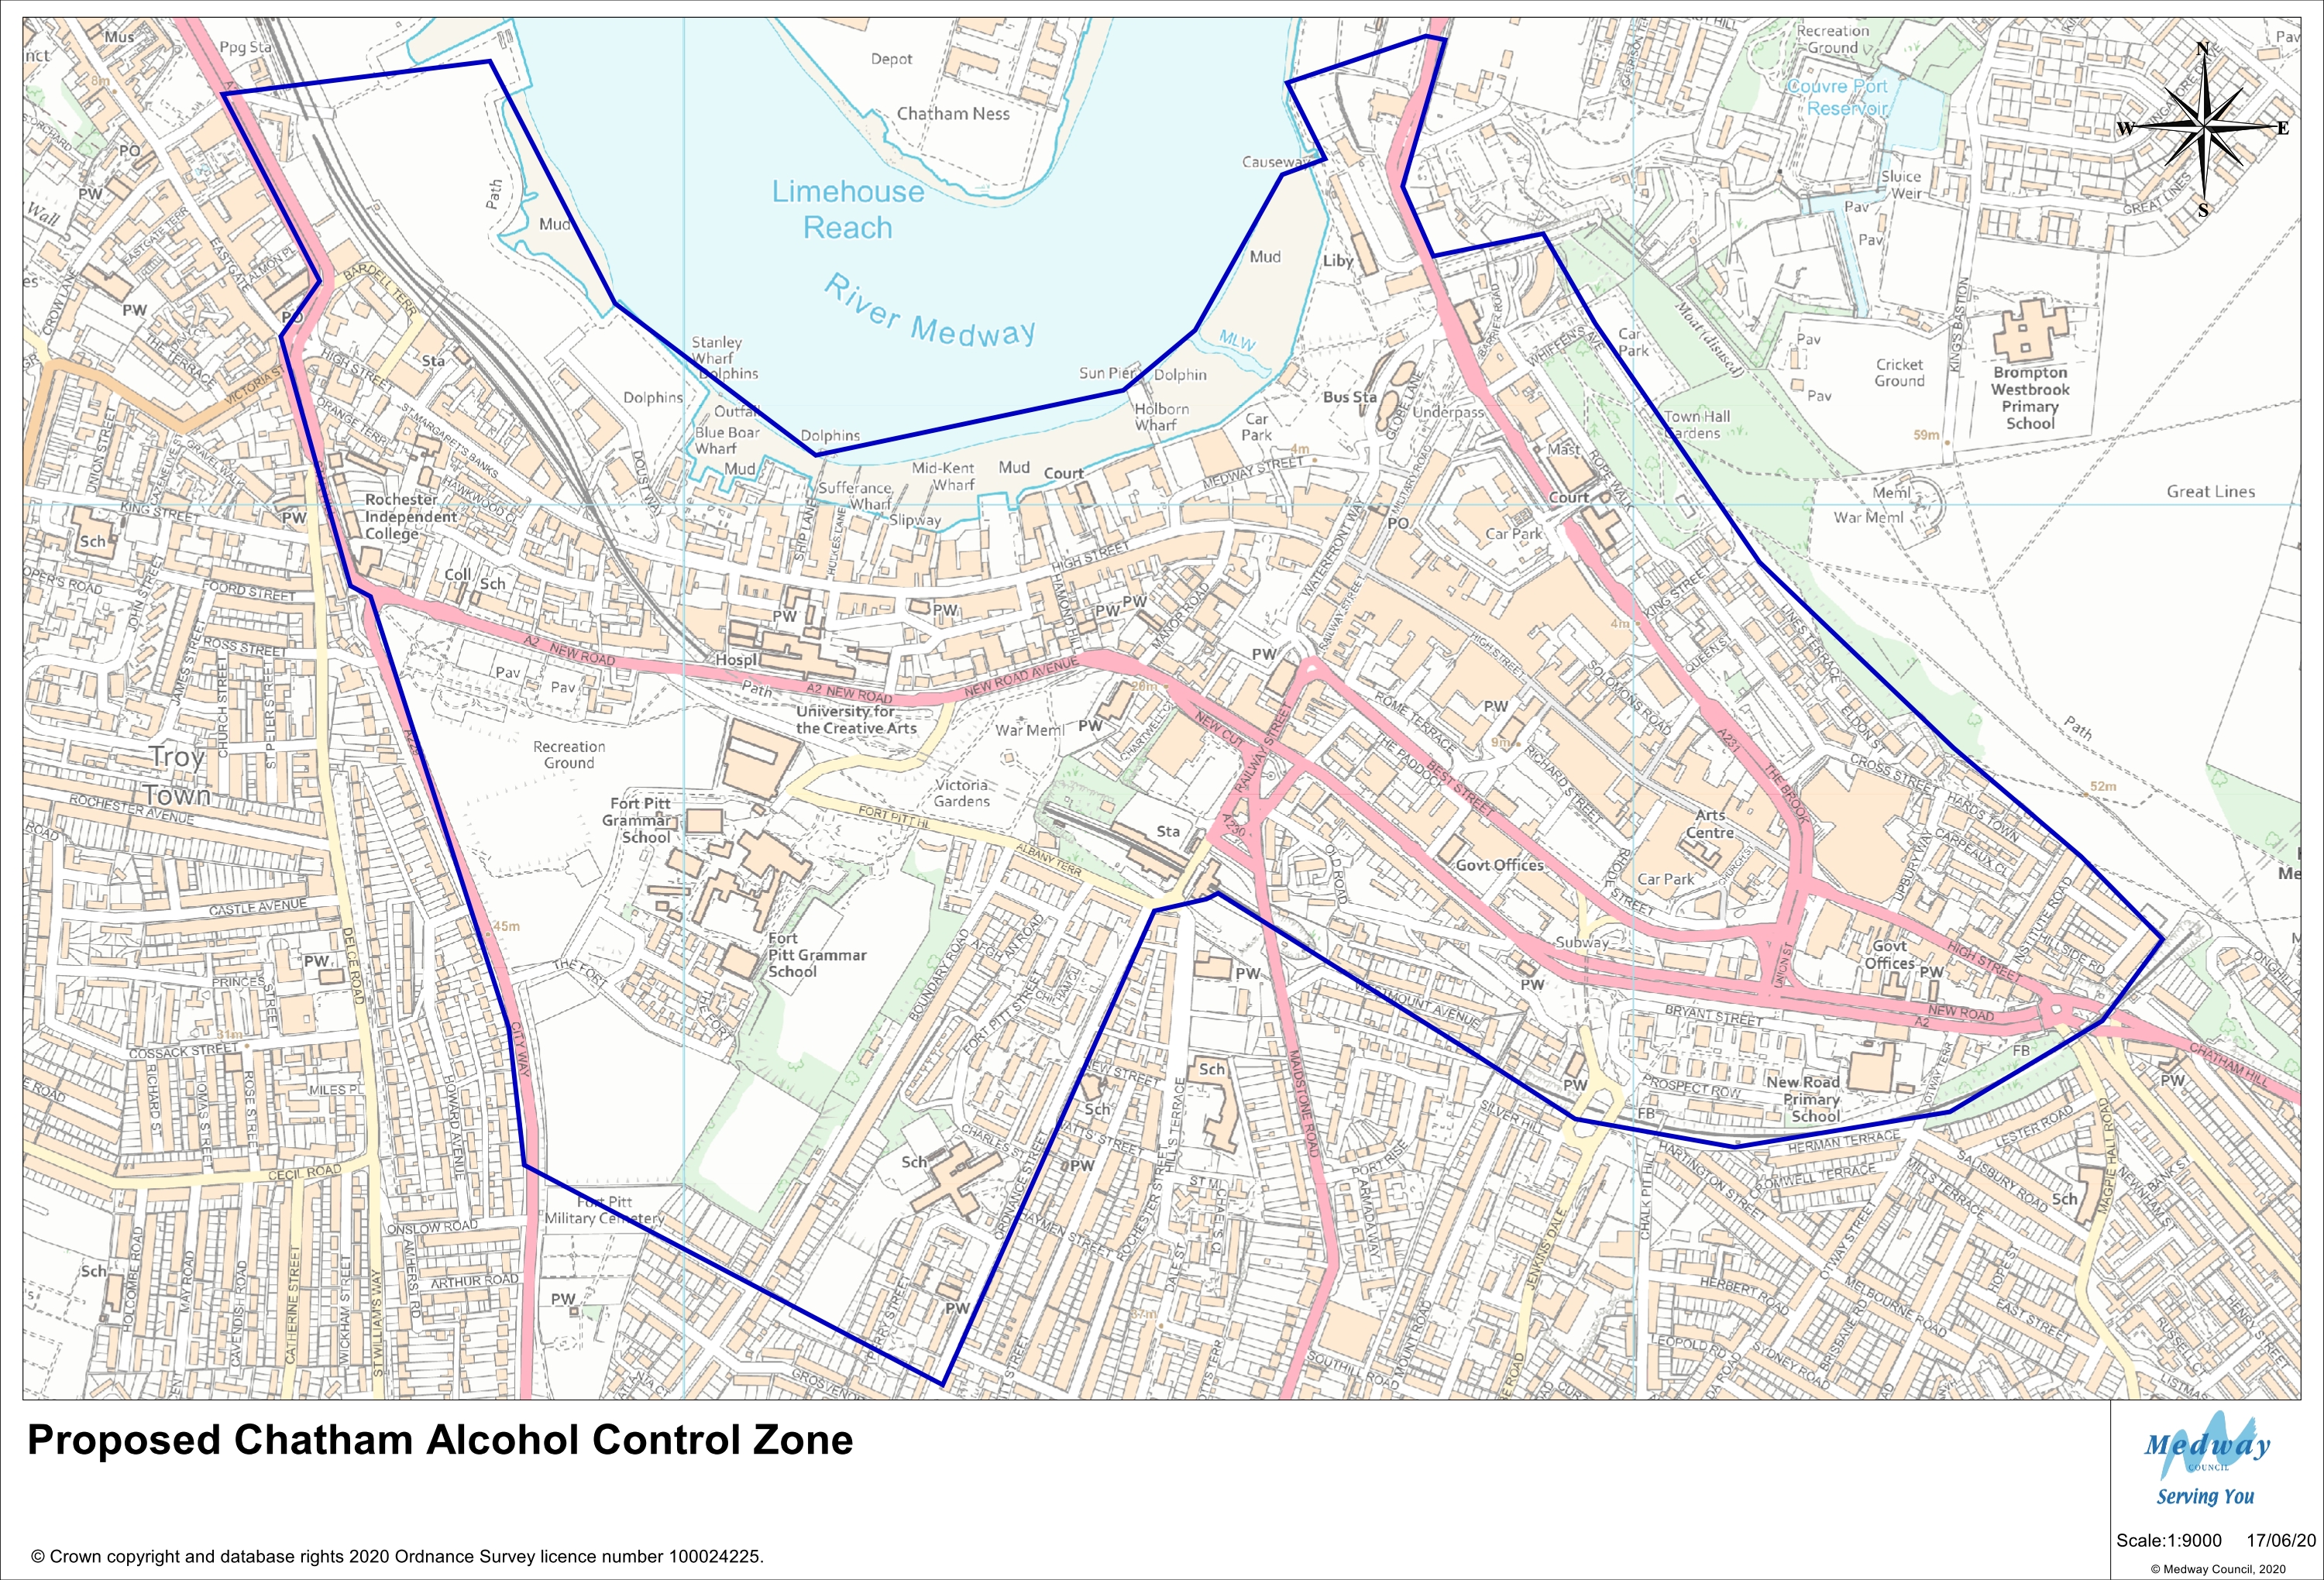 The proposed Chatham Alcohol Control Zone covers Chatham Town Centre. Starting in the North of the zone it extends from Dock Road by St Mary's Church, extending south along Dock Road. The zone then follows the Barrier Ditch and takes in Whiffens Avenue, Town Hall Gardens, Lines Terrace, Eldon Street, Hards Town, Institute Road and Chelmar road at the boundary of the area. It then proceeds west following the line of the railway line all the way to Chatham Station. It follows along Ordnance Street before crossing to City Way. From here it heads towards Rochester down Star Hill and along Corporation Street to Blue Boar Lane. The zone then proceeds east along Blue Boar Lane towards the River Medway. The zone follows the river back towards Dock Road, taking in the High Street and Chatham Riverside.